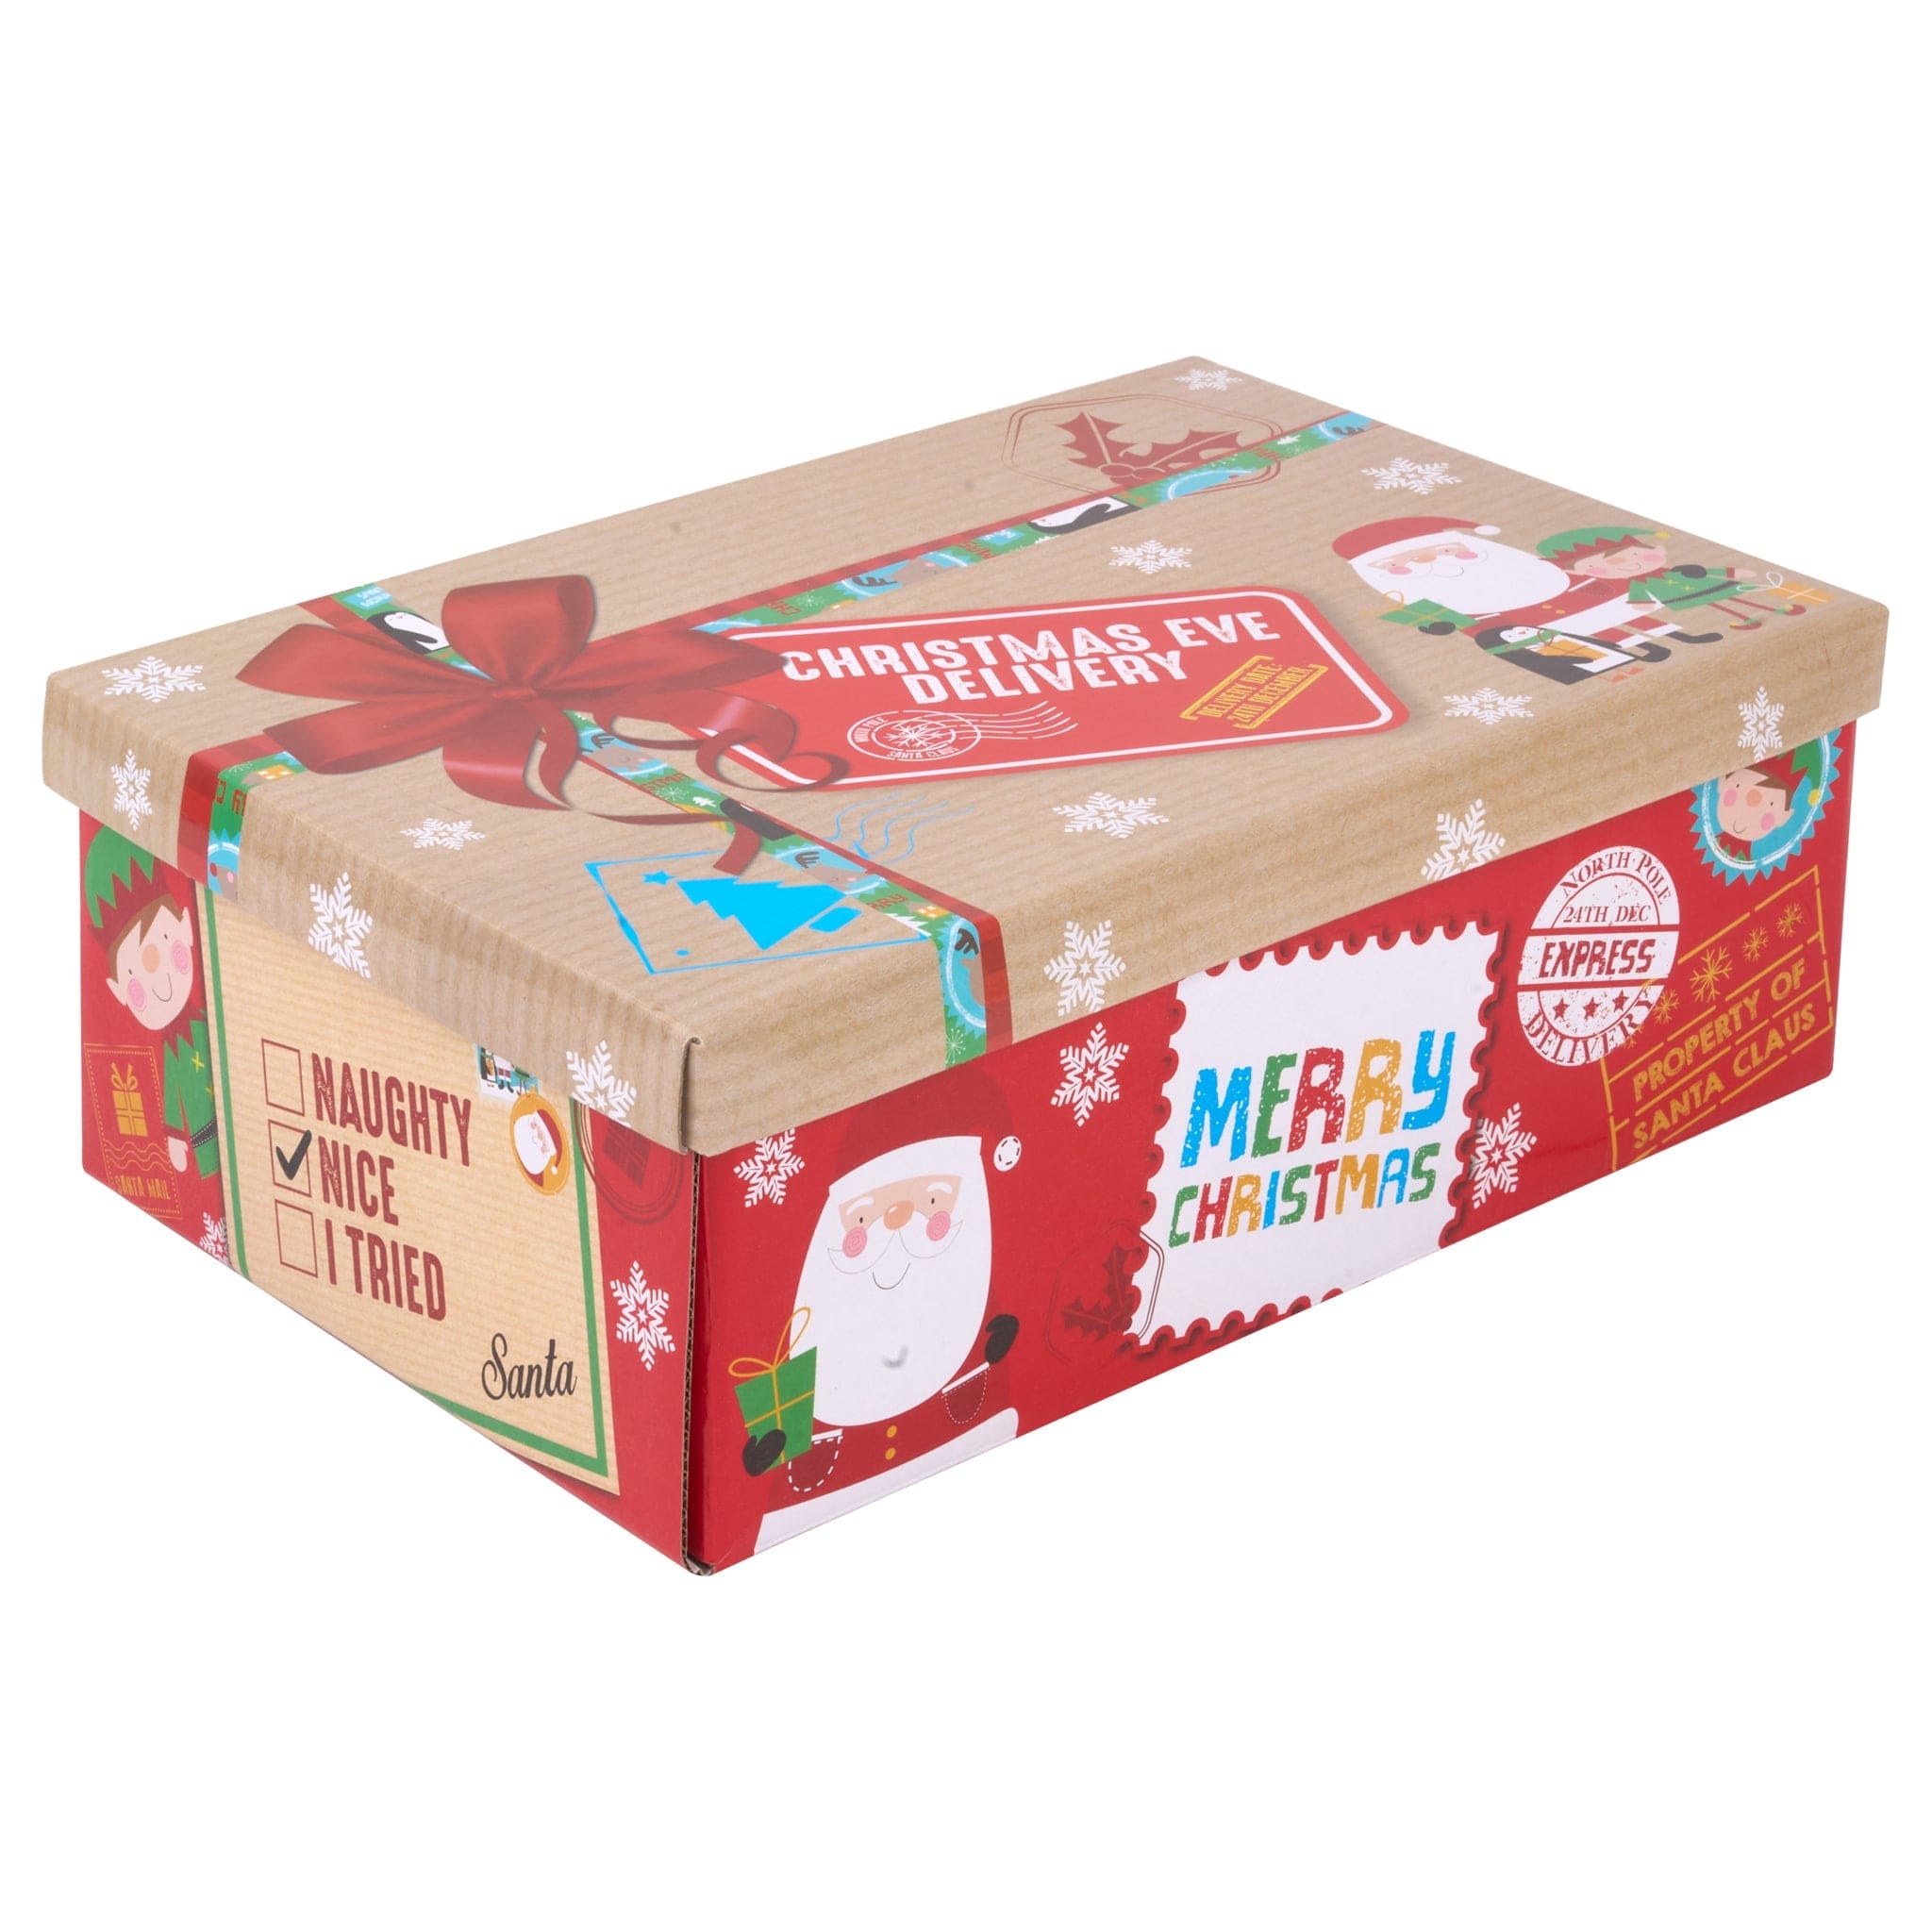 Wooden Effect Festive Parcel Christmas Eve Box - Assorted Sizes only5pounds-com